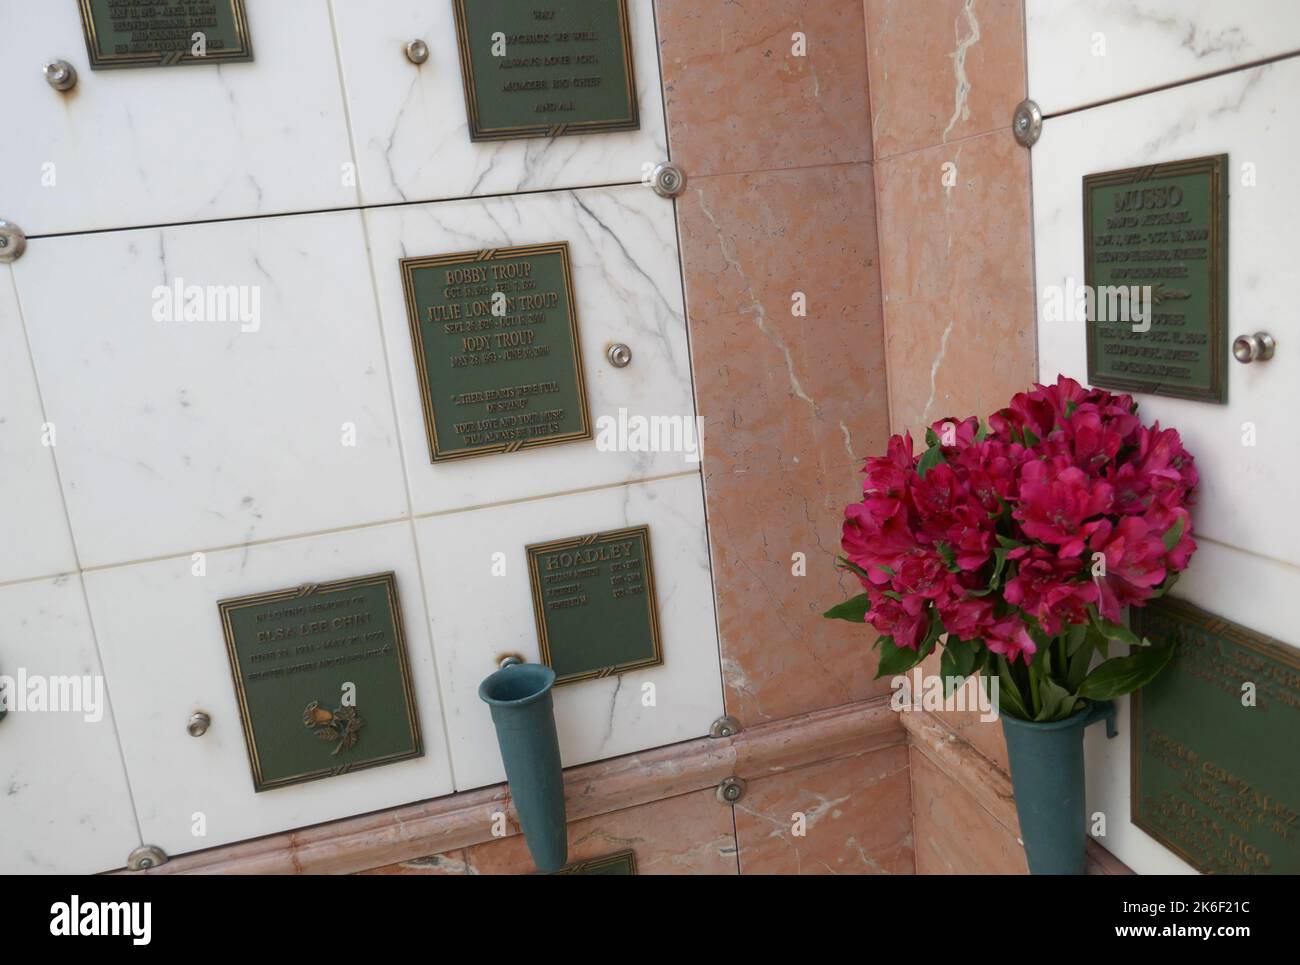 Los Angeles, California, USA 9th October 2022 Bobby Troup and Actress/singer Julie London Troup's Graves in Columbarium of Providence in Courts of Remembrance at Forest Lawn Memorial Park Hollywood Hills on October 9, 2022 in Los Angeles, California, USA. Photo by Barry King/Alamy Stock Photo Stock Photo